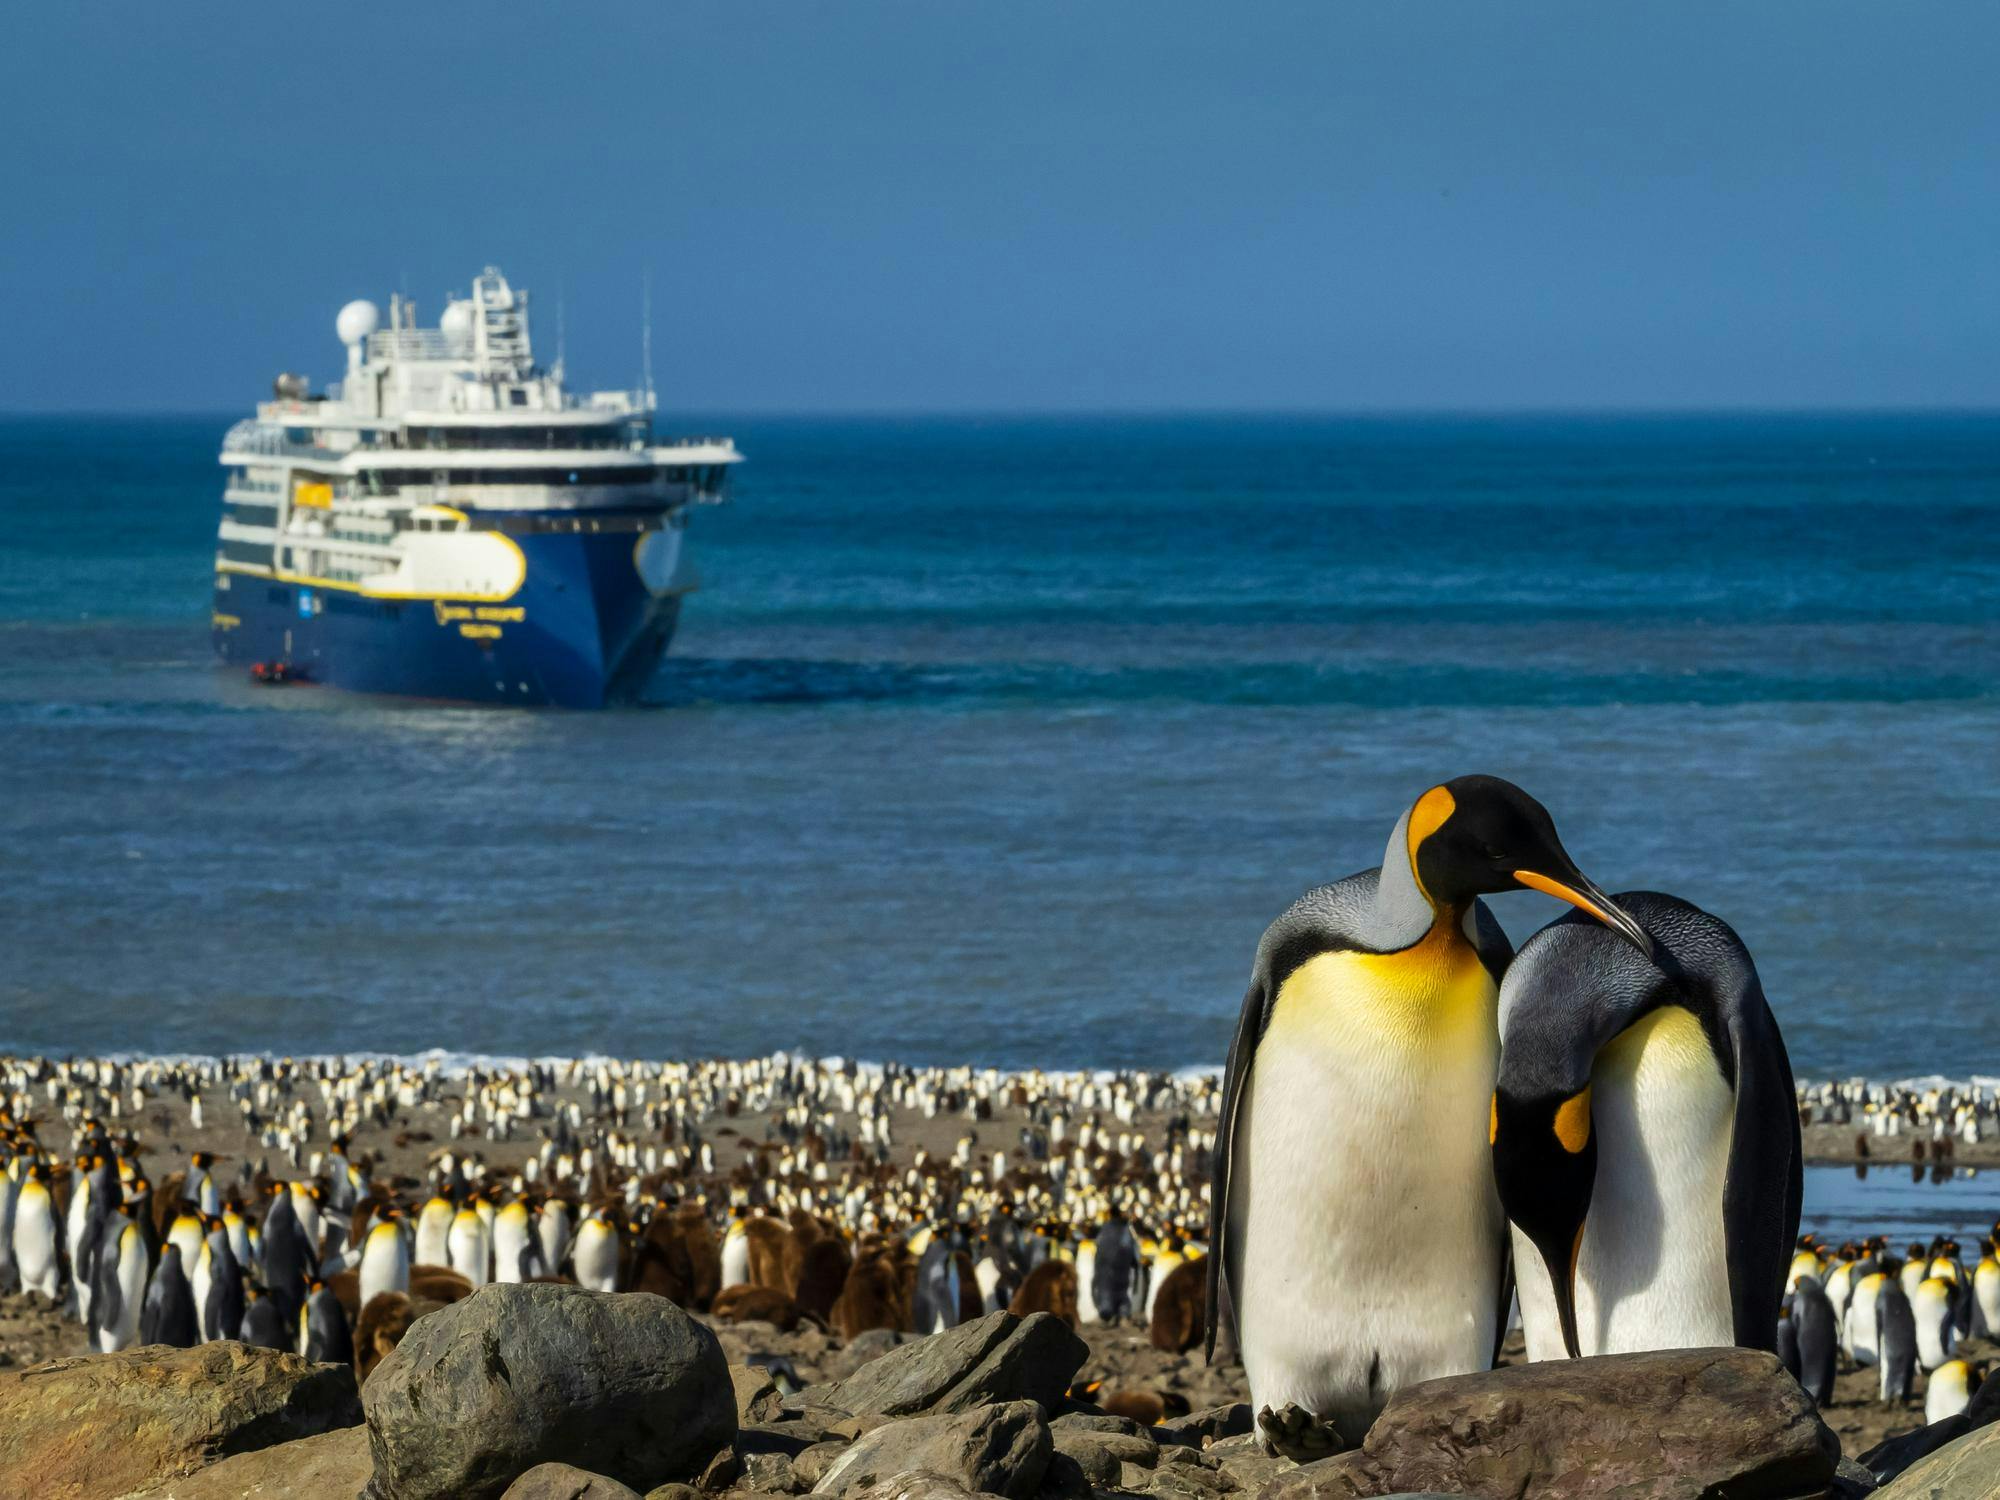 King Penguins courting  with National Geographic Resolution offshore in St. Andrews Bay, South Georgia